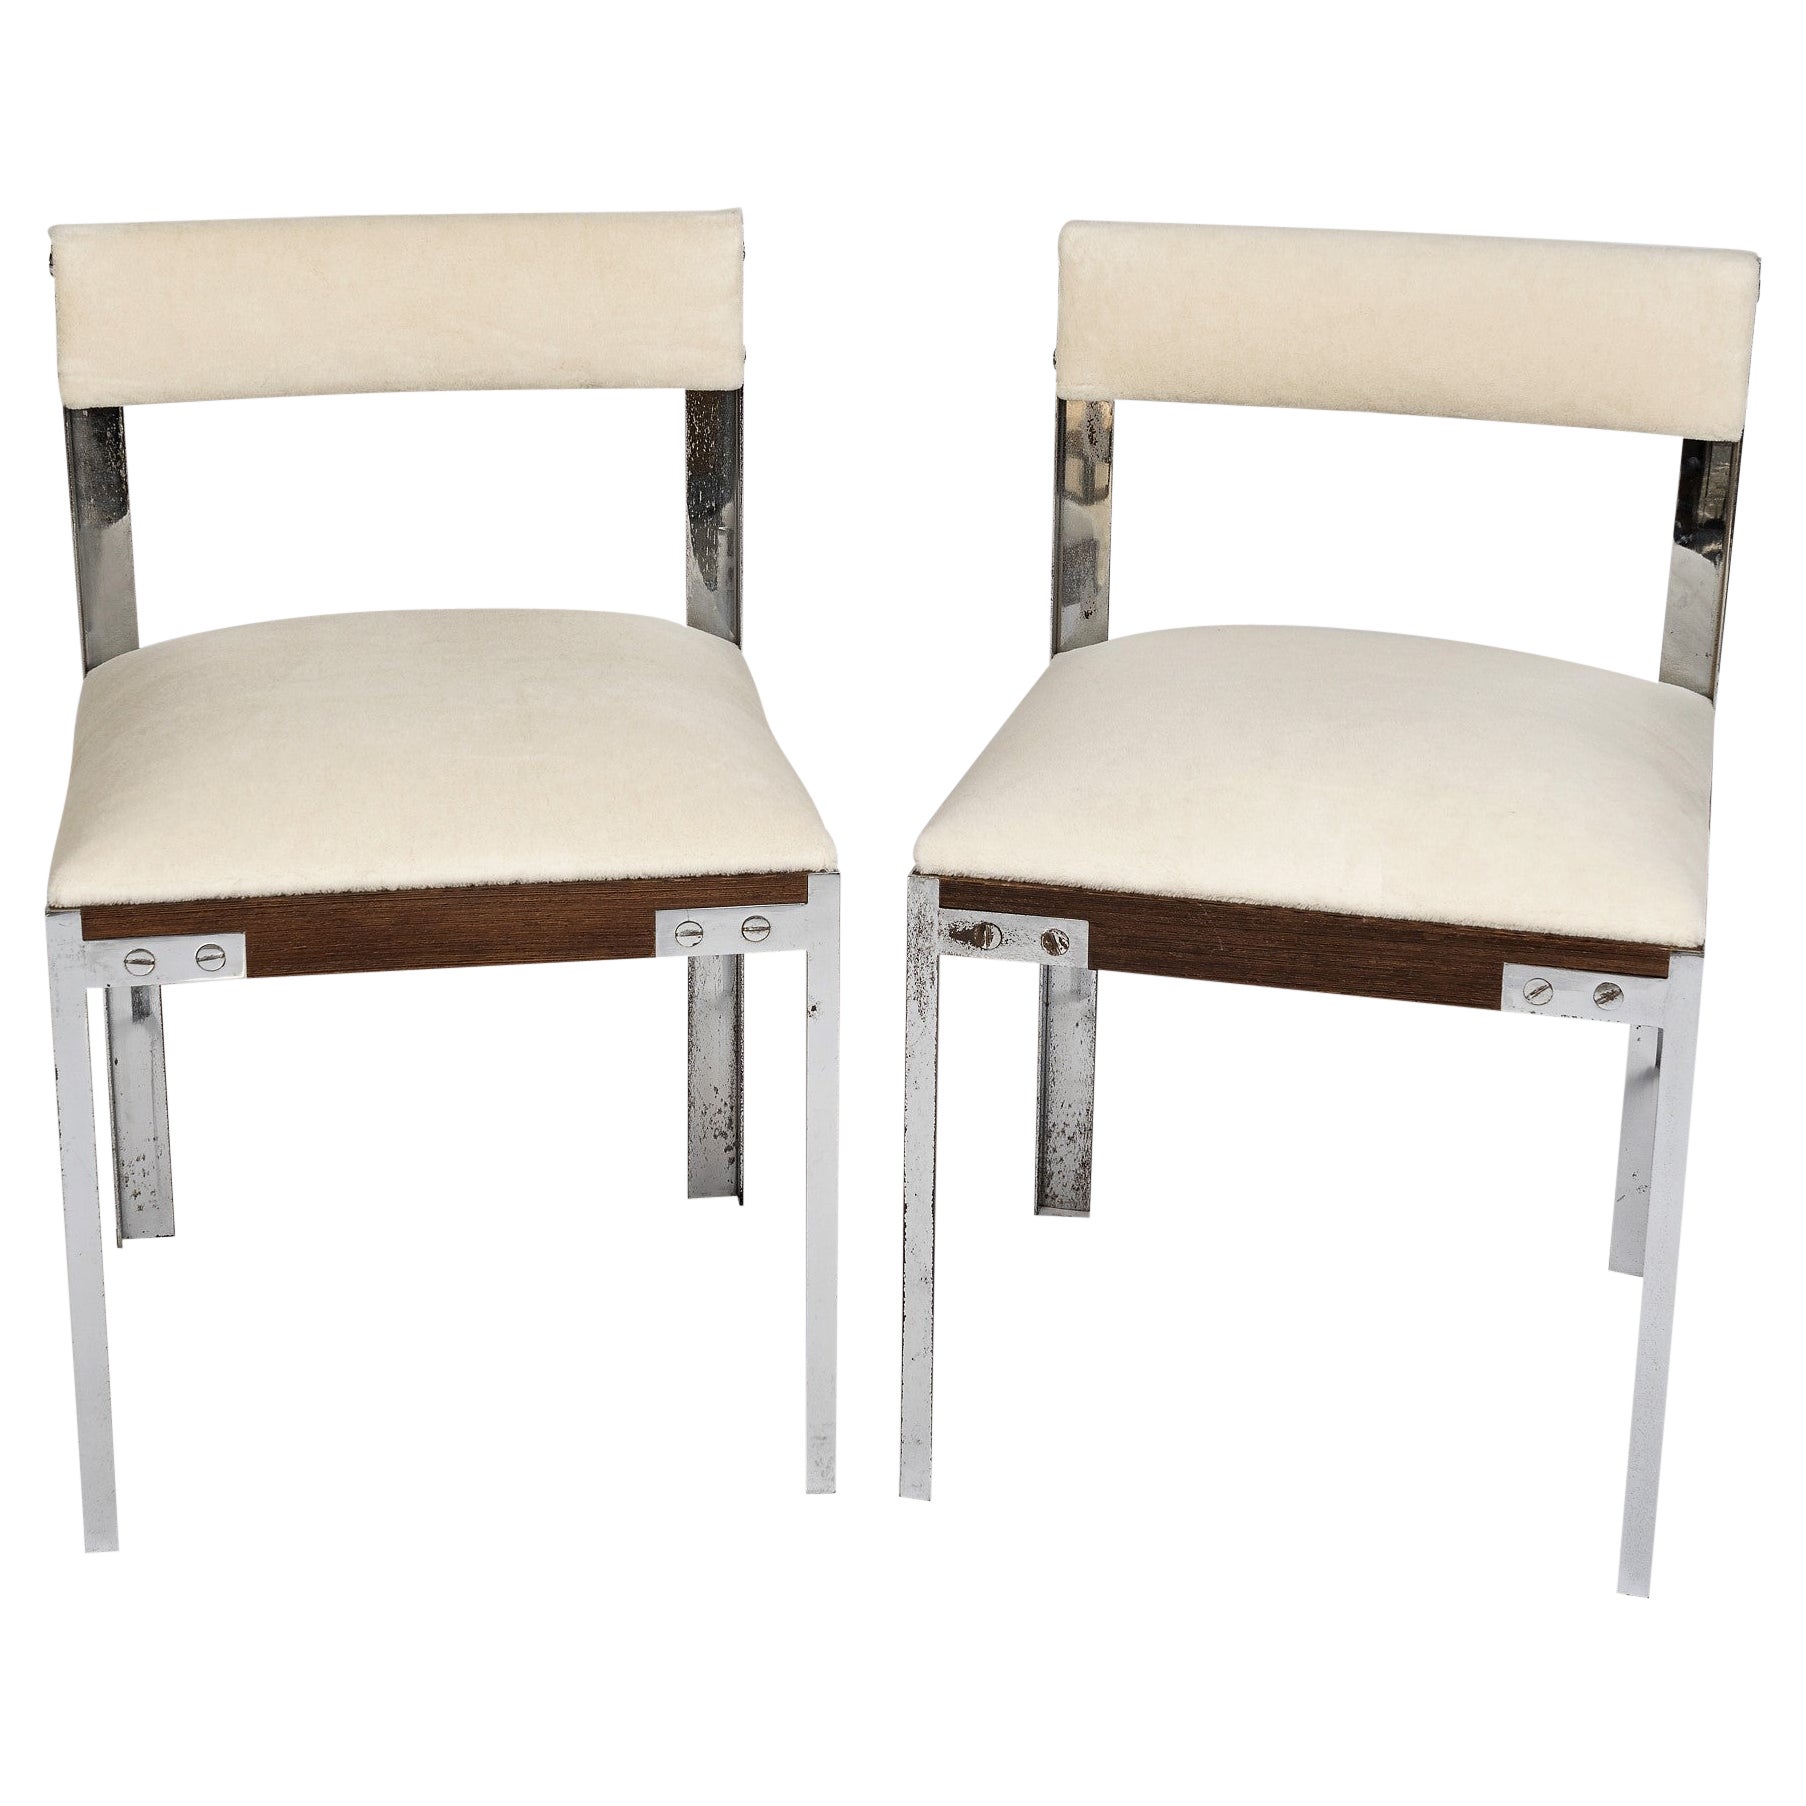 Pair of Chrome and Palmwood Chairs by Hubert Nicolas, France 1970's For Sale